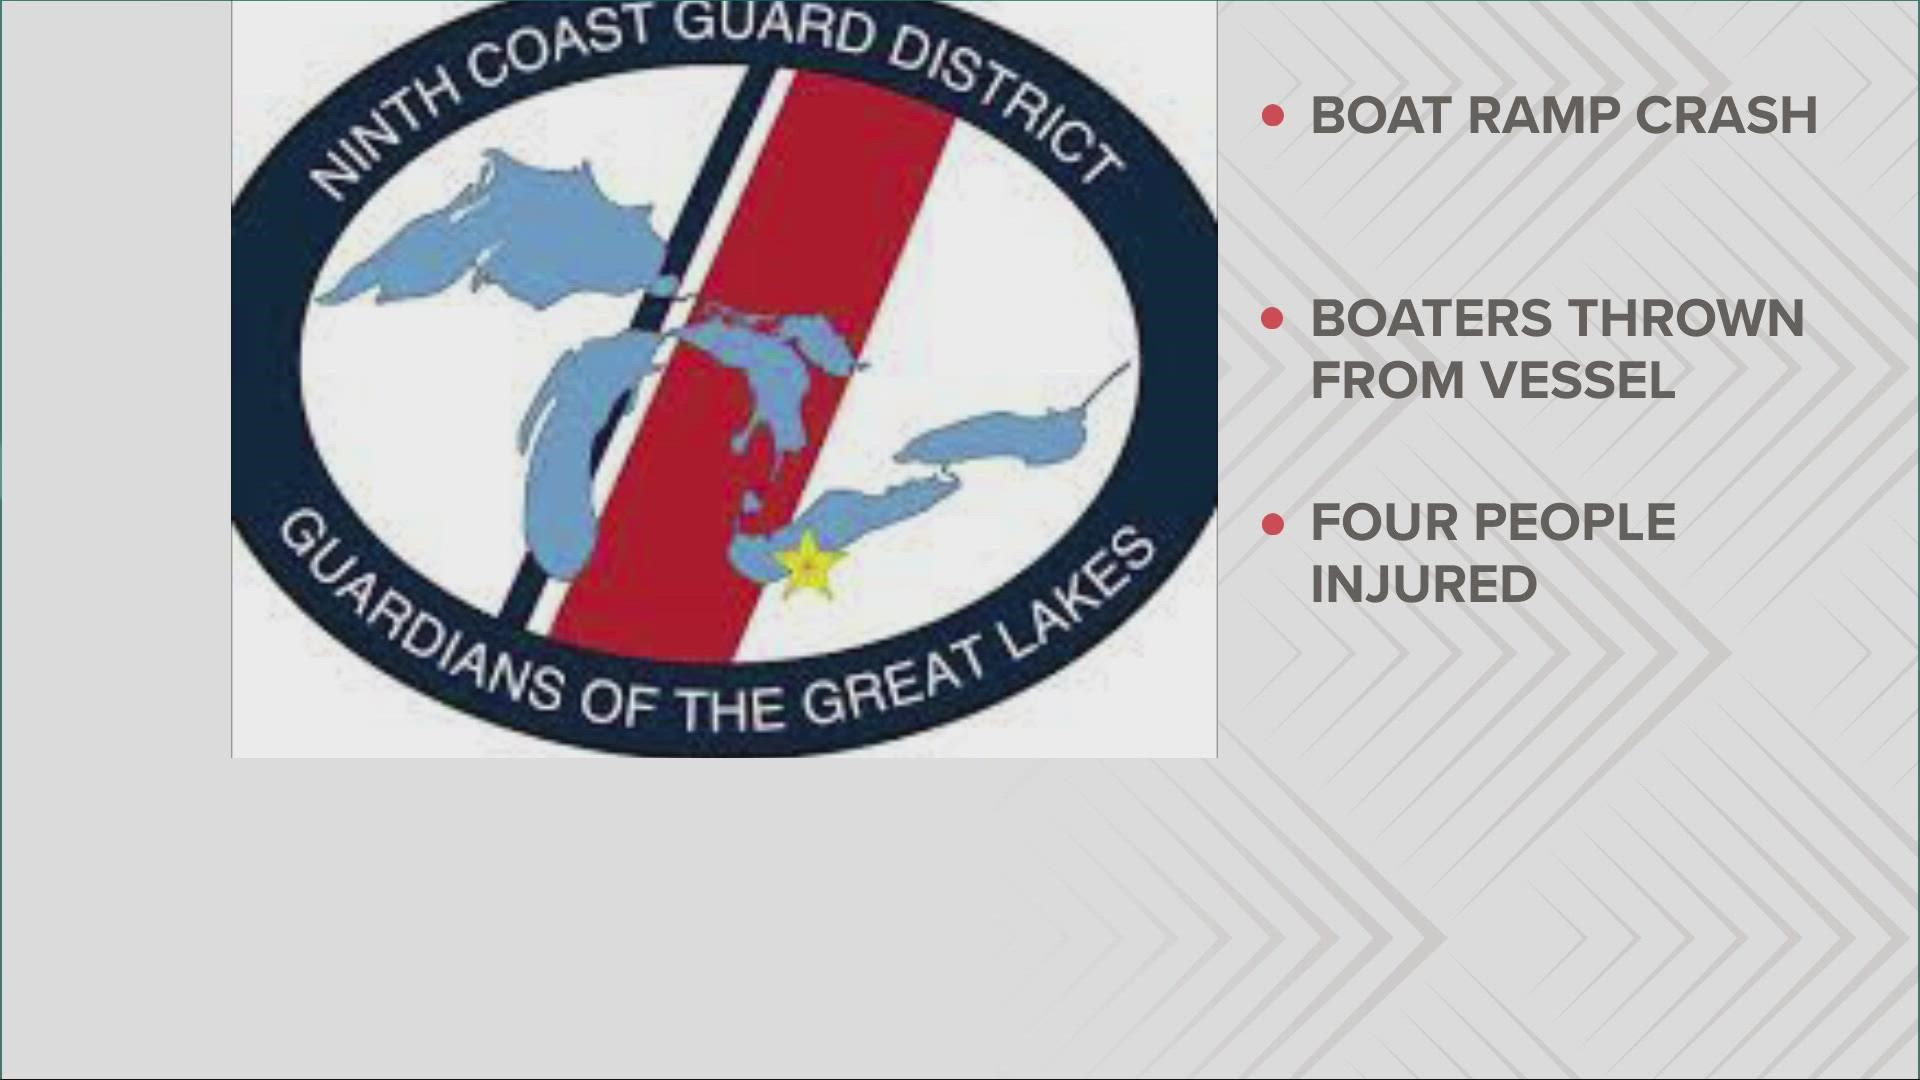 According to the U.S. Coast Guard Great Lakes, four were injured.